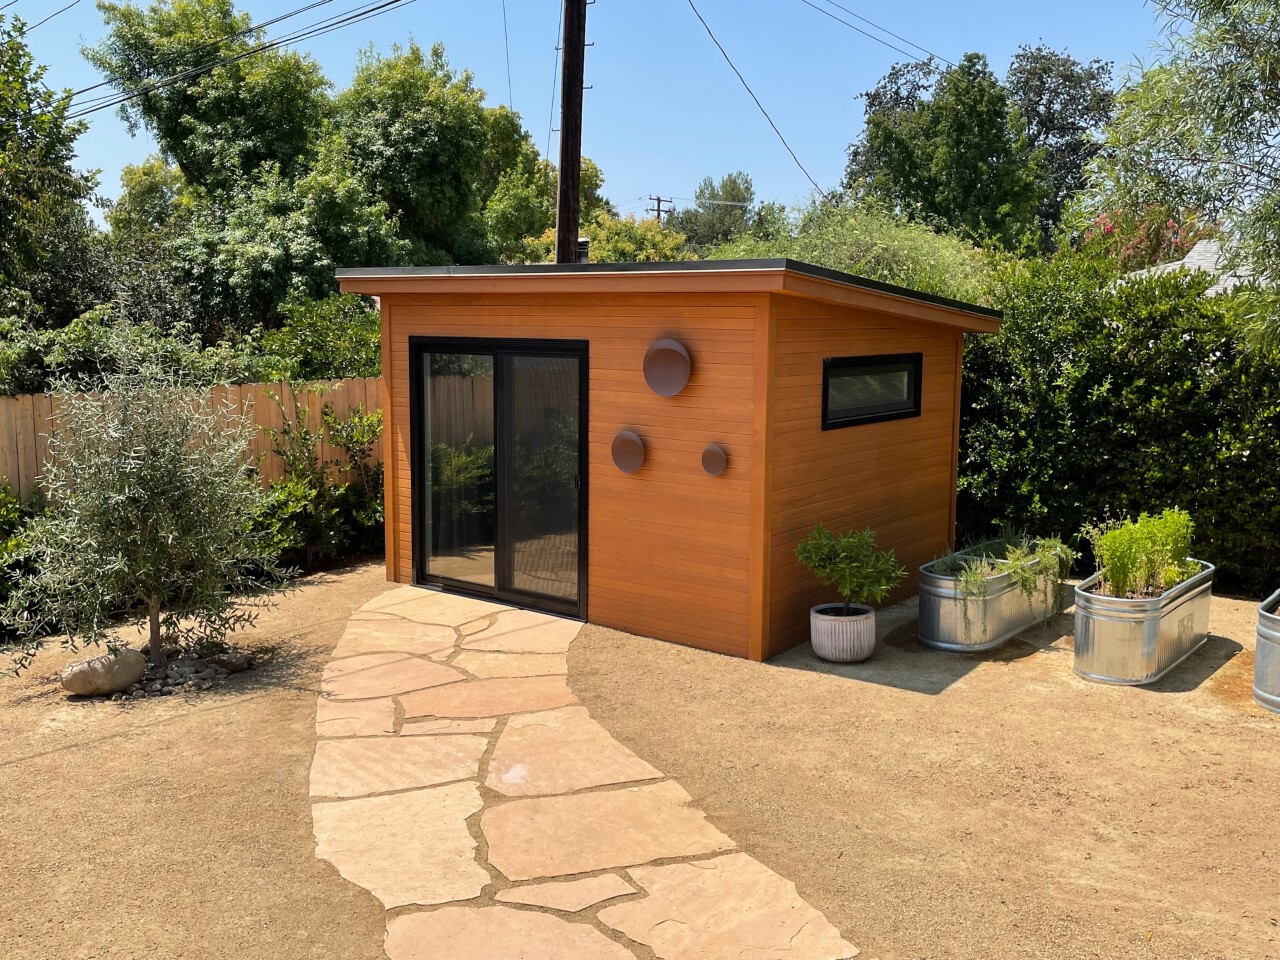 Front view of 10' x 12' Urban Studio Home Studio located in Ojai, California – Summerwood Products